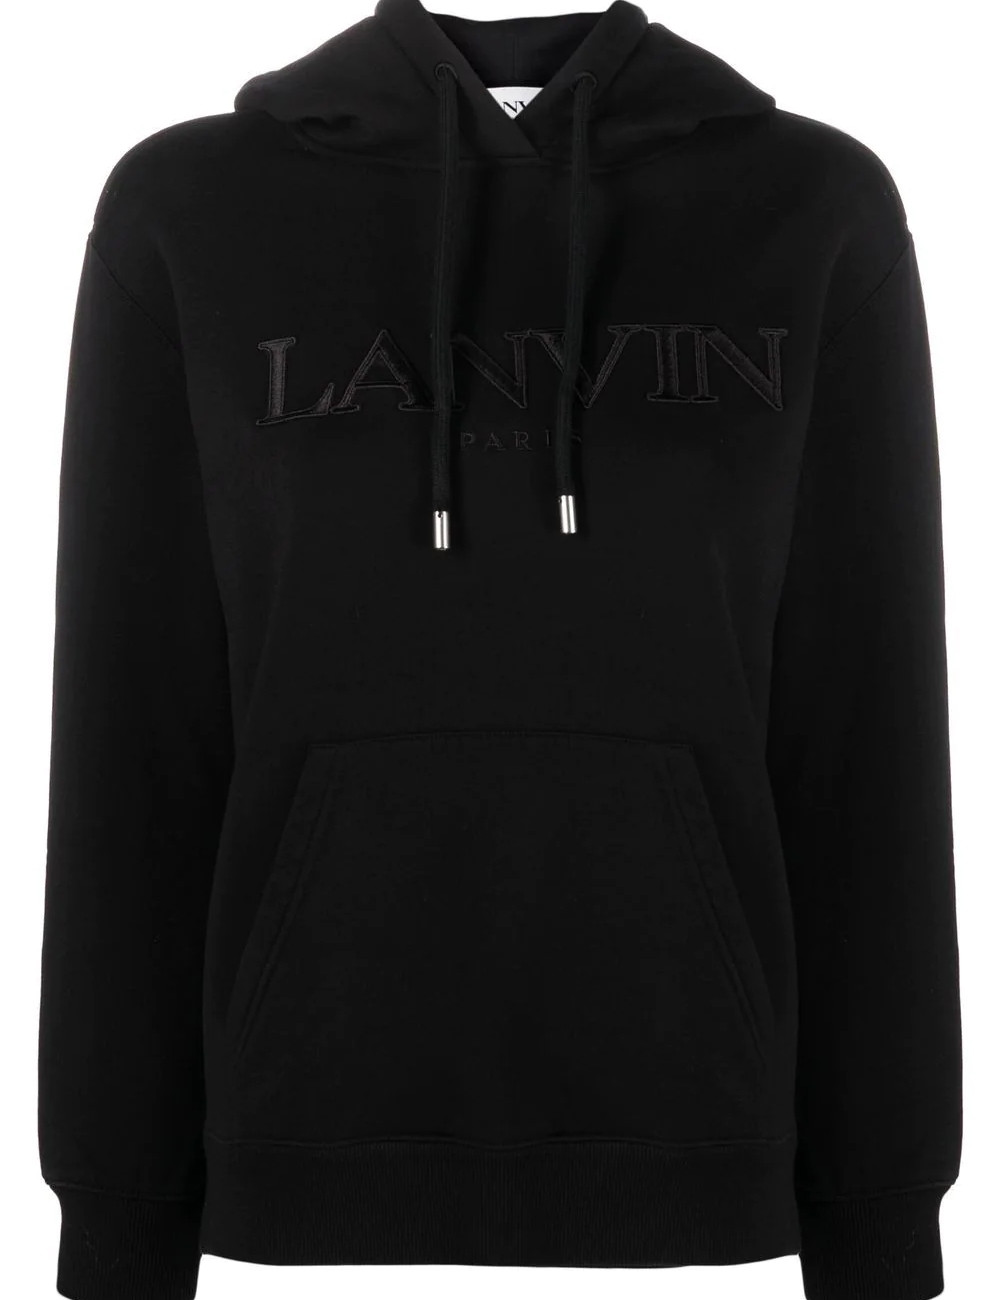 Woman's Embroidered Hoody